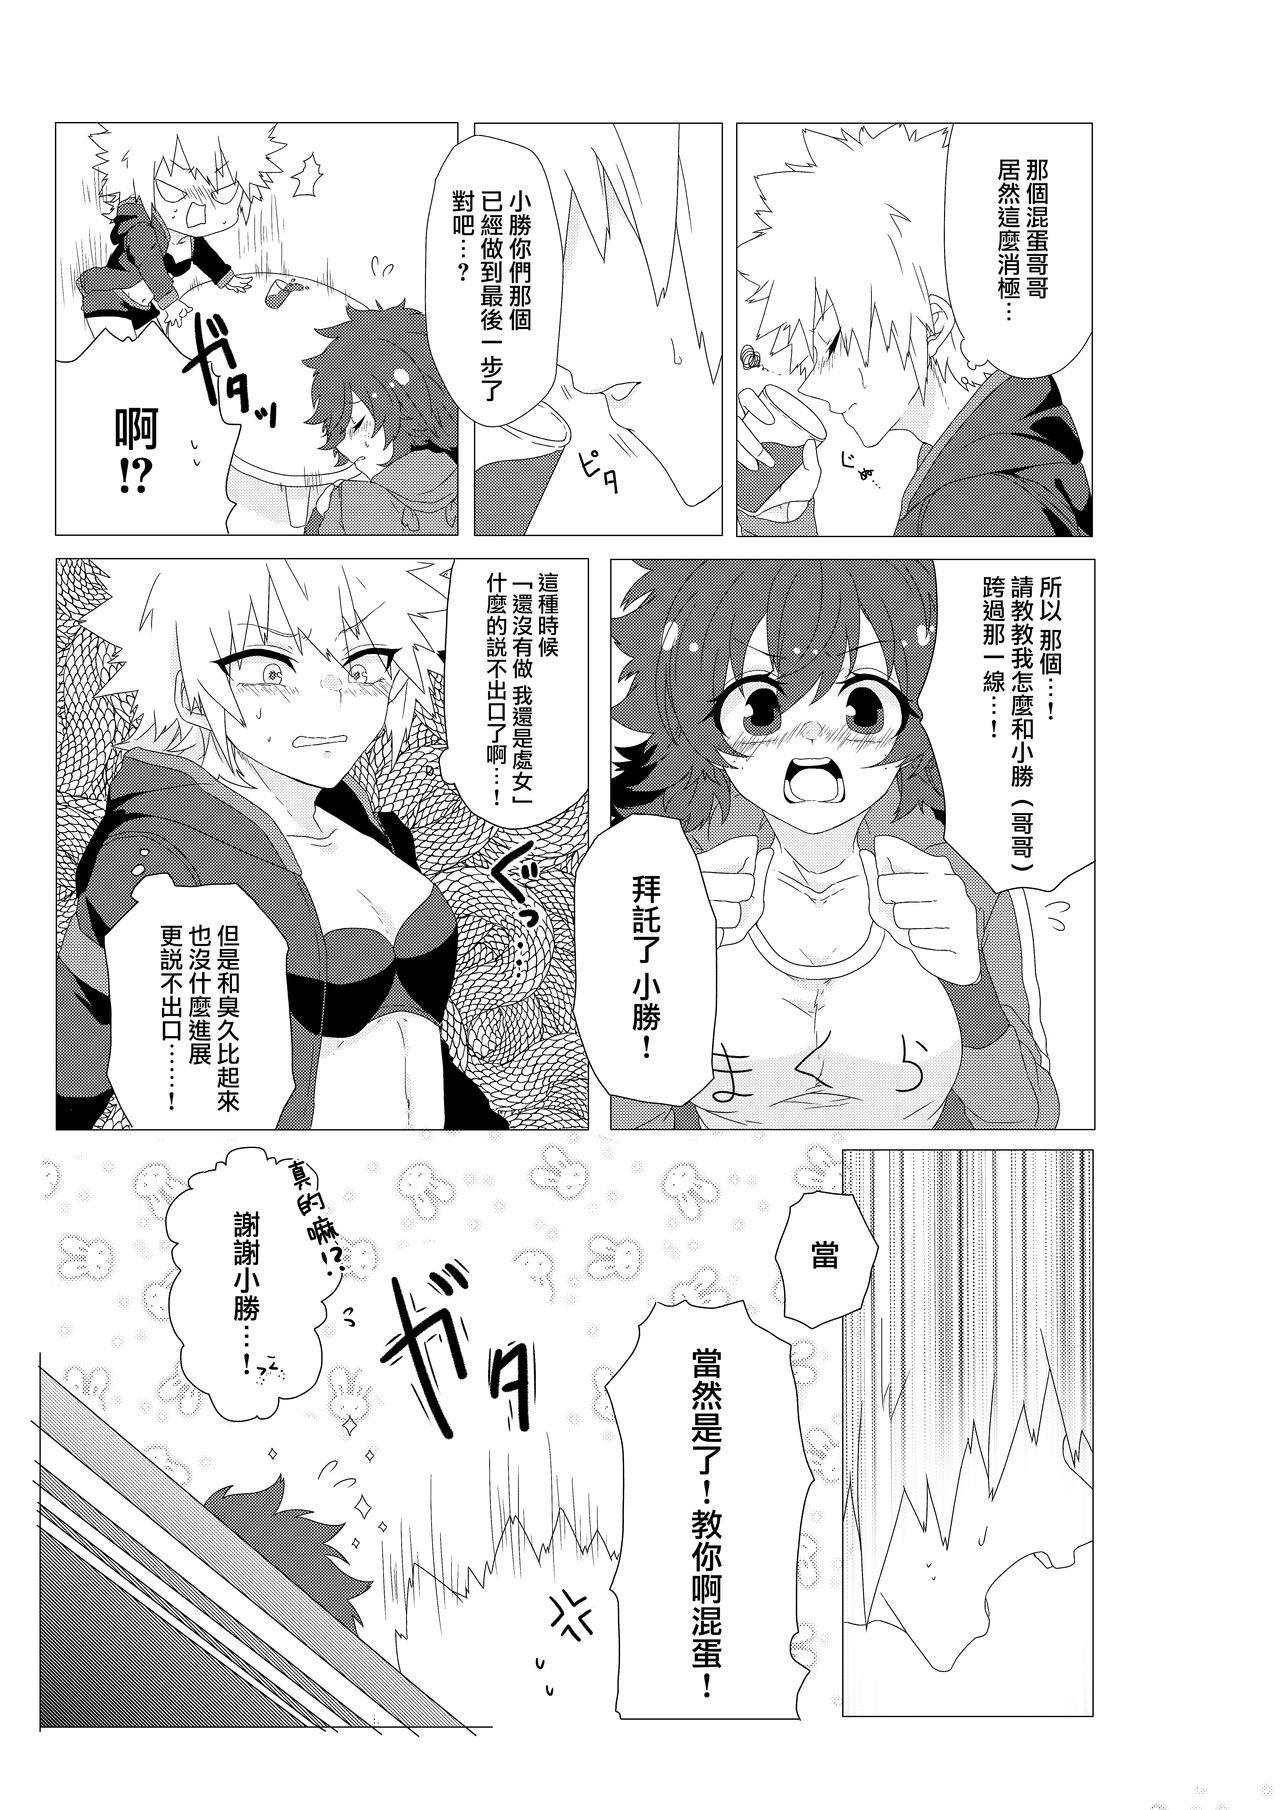 Strap On Chicken na Kareshi to Lingerie - My hero academia Dirty Talk - Page 5